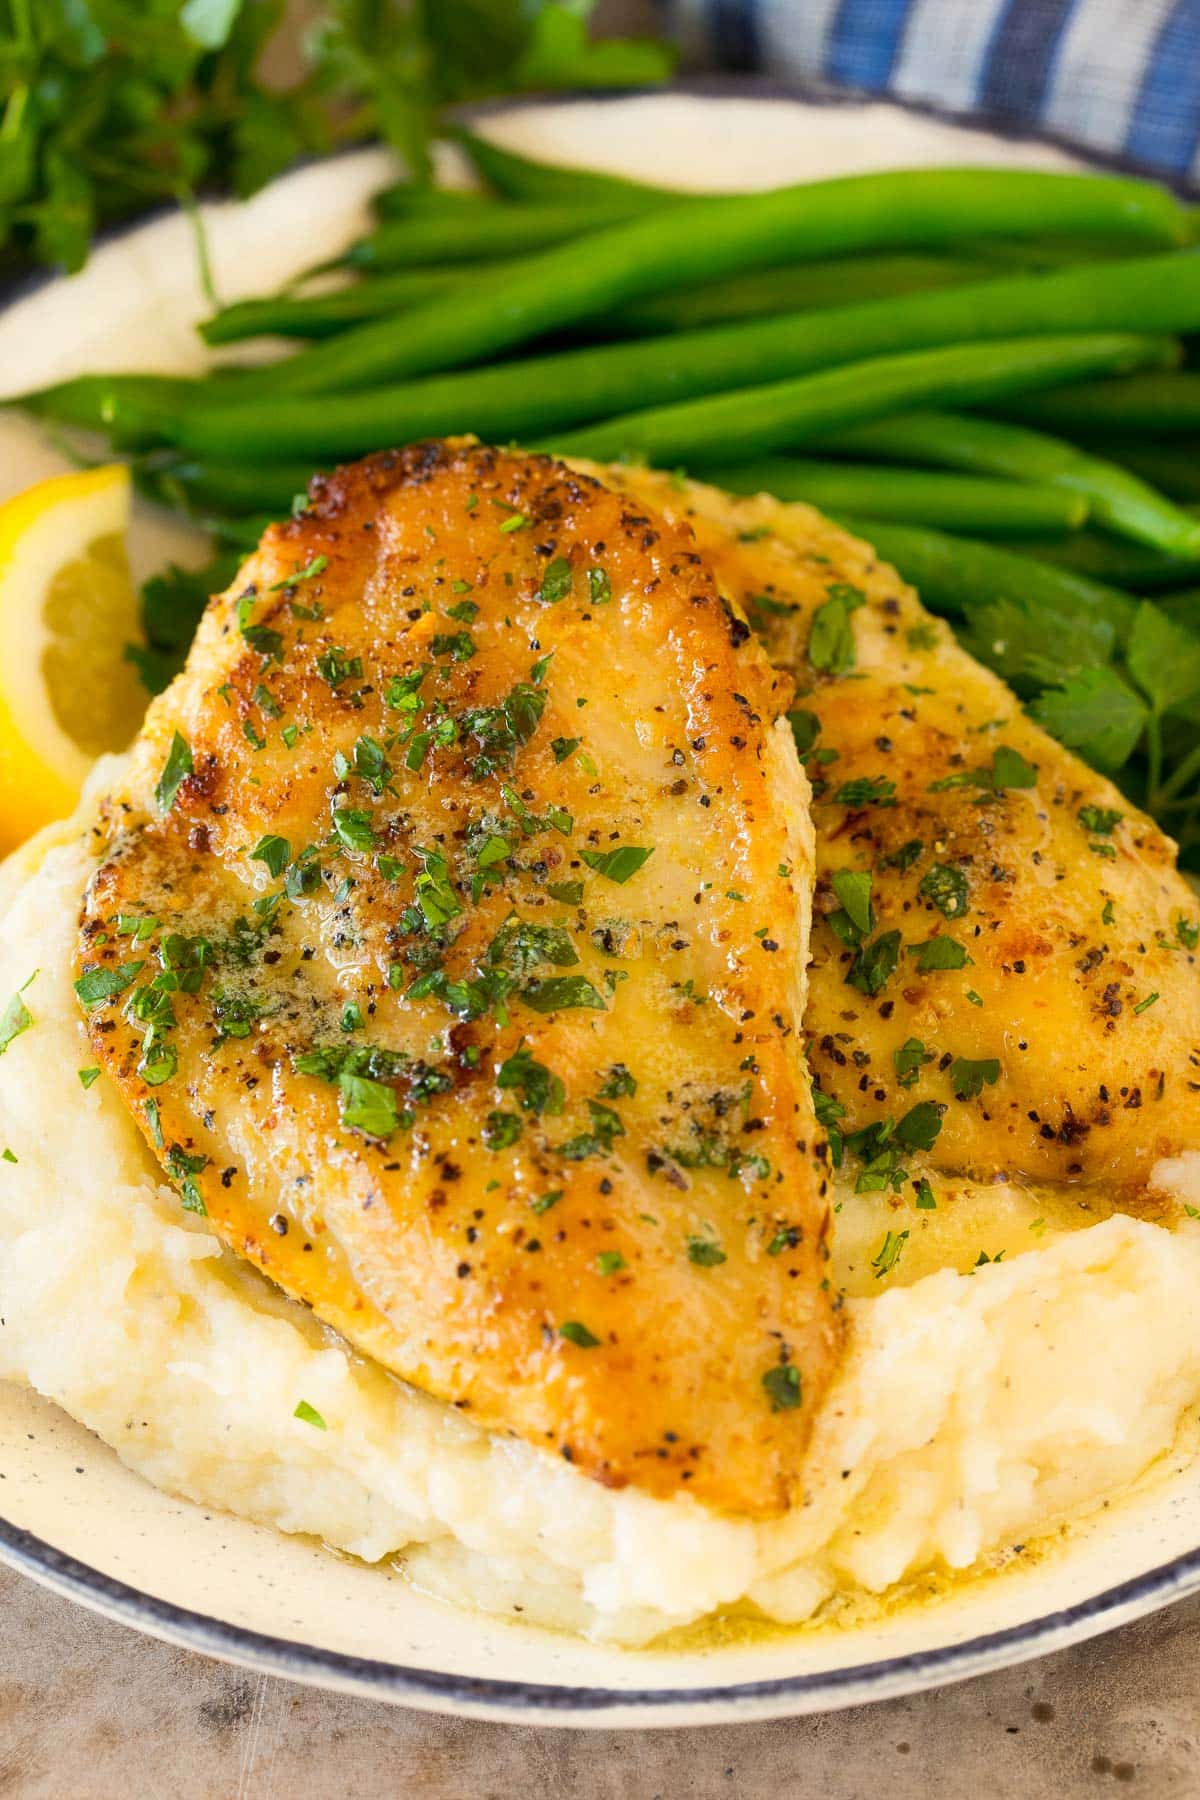 Lemon pepper chicken served with mashed potatoes and green beans.